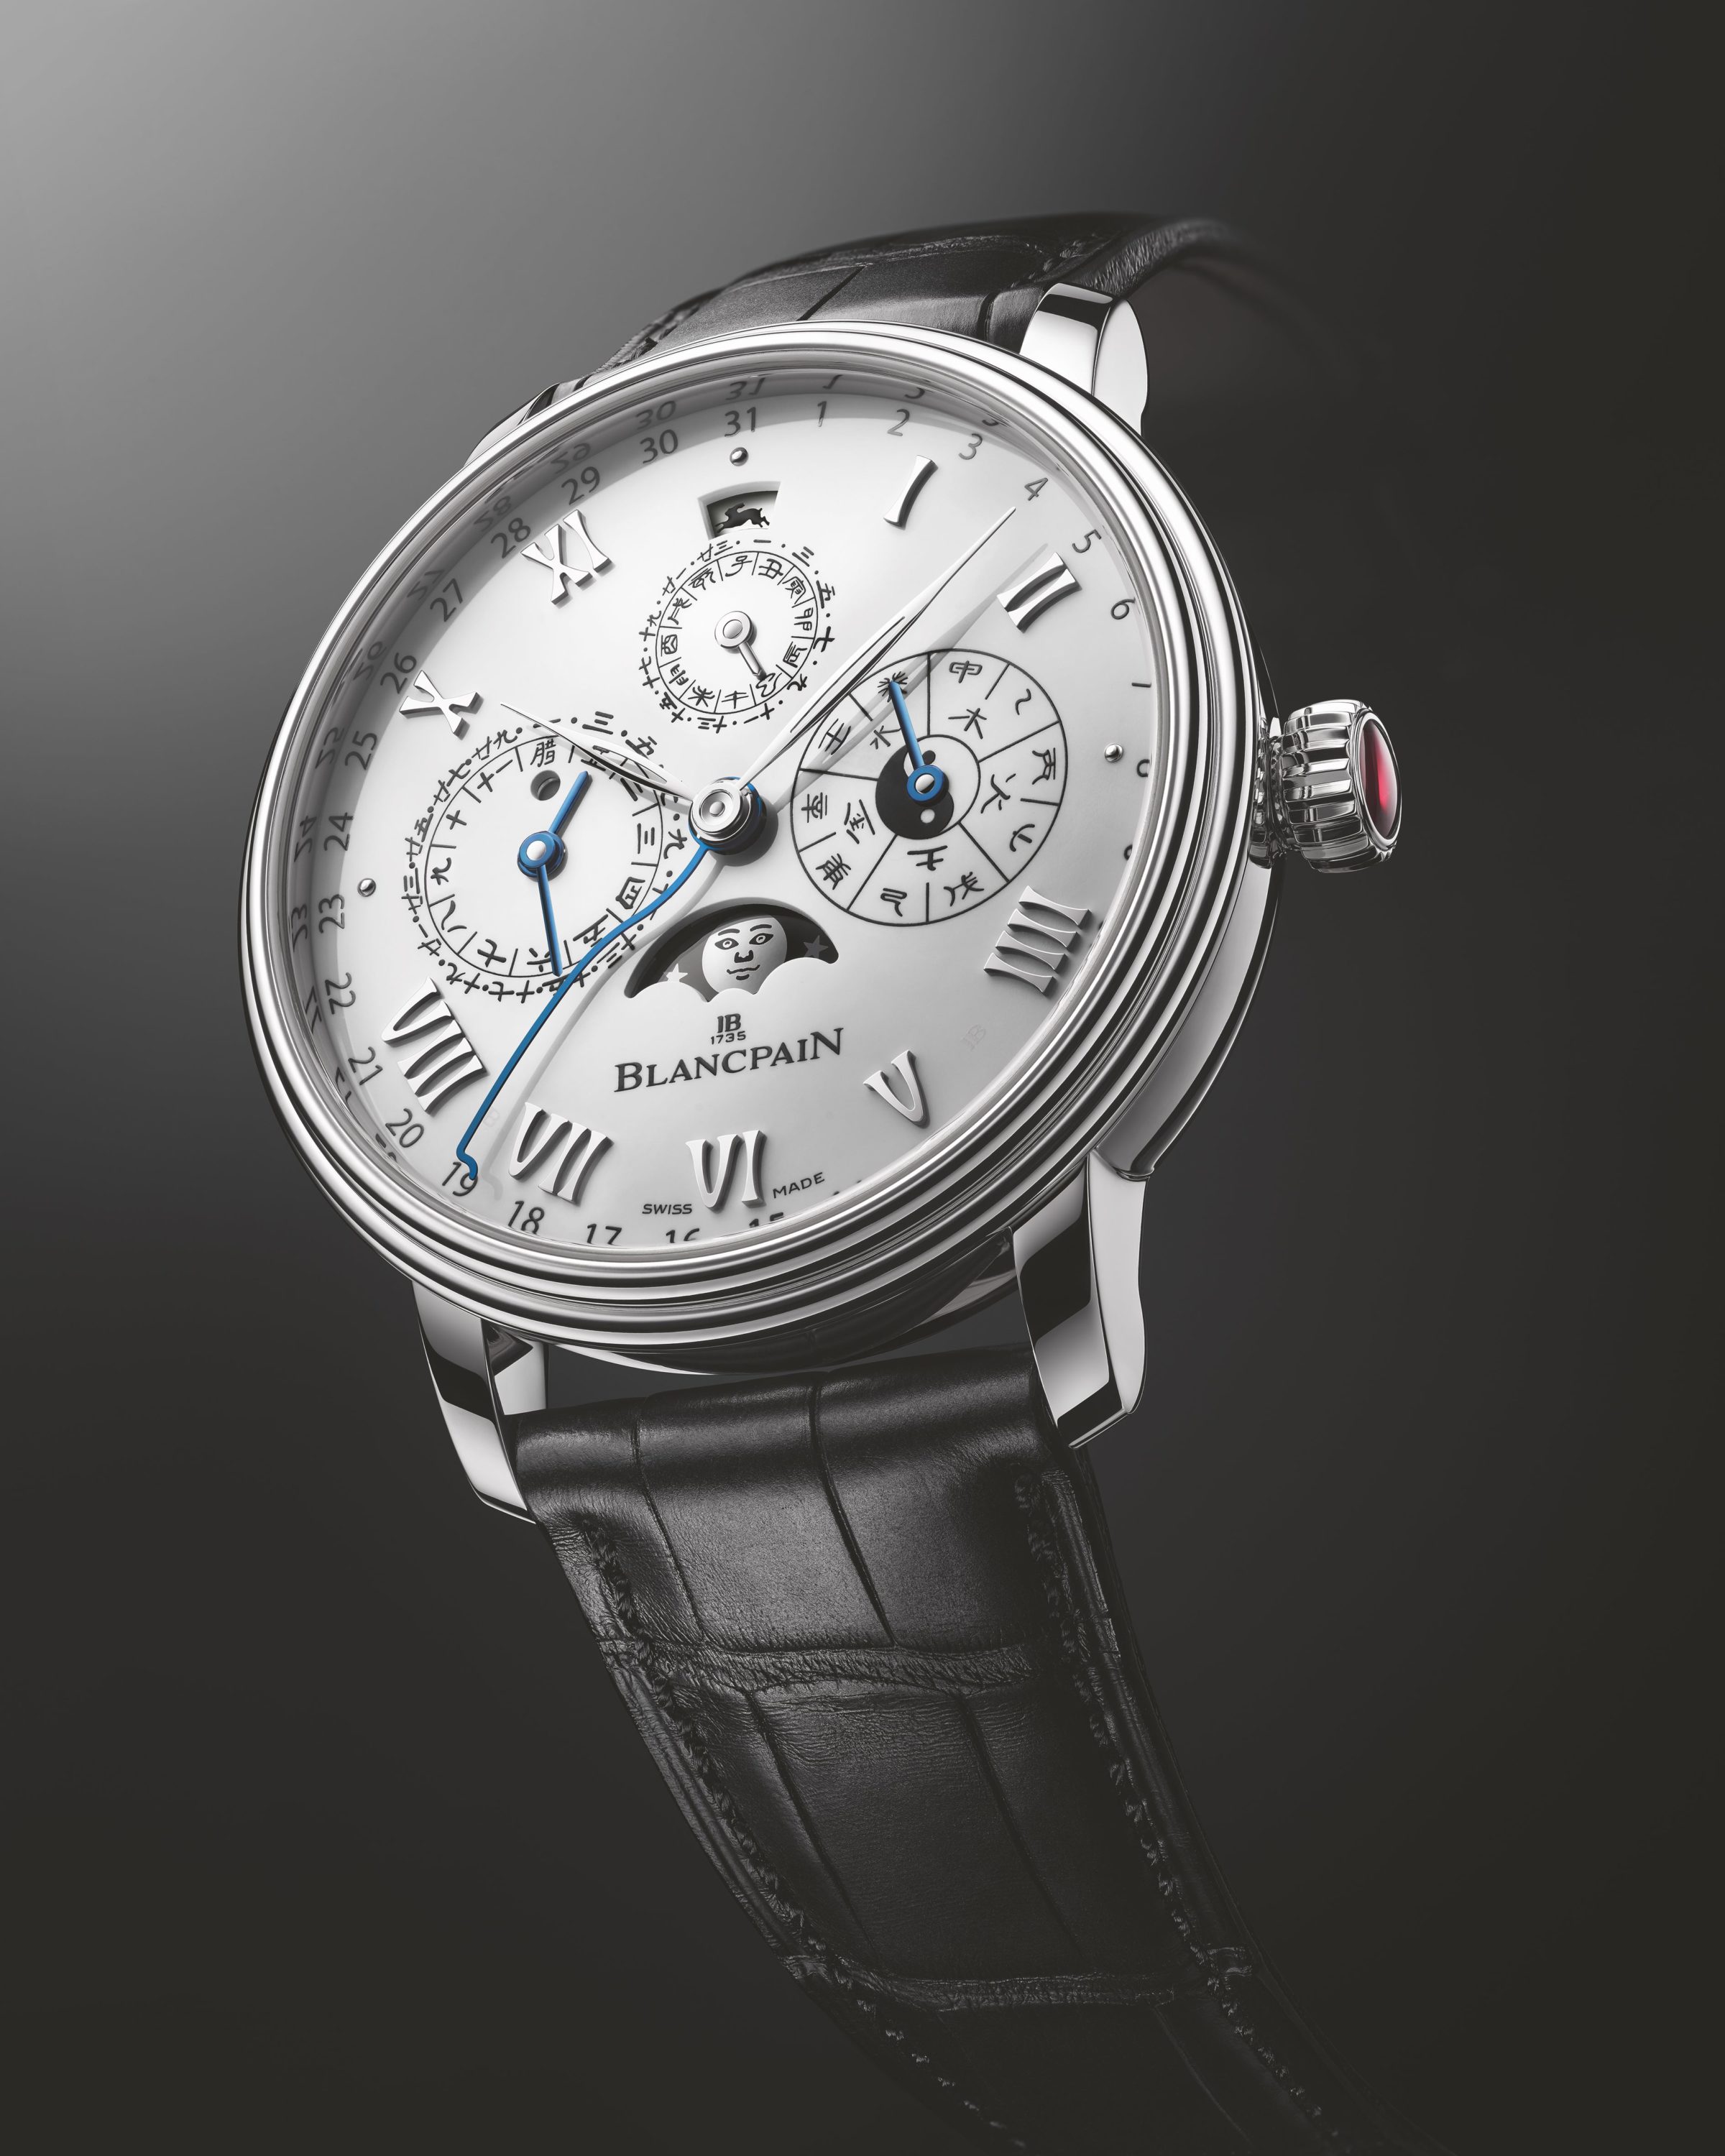 Introducing the Blancpain Villeret Calendrier Chinois Traditionnel